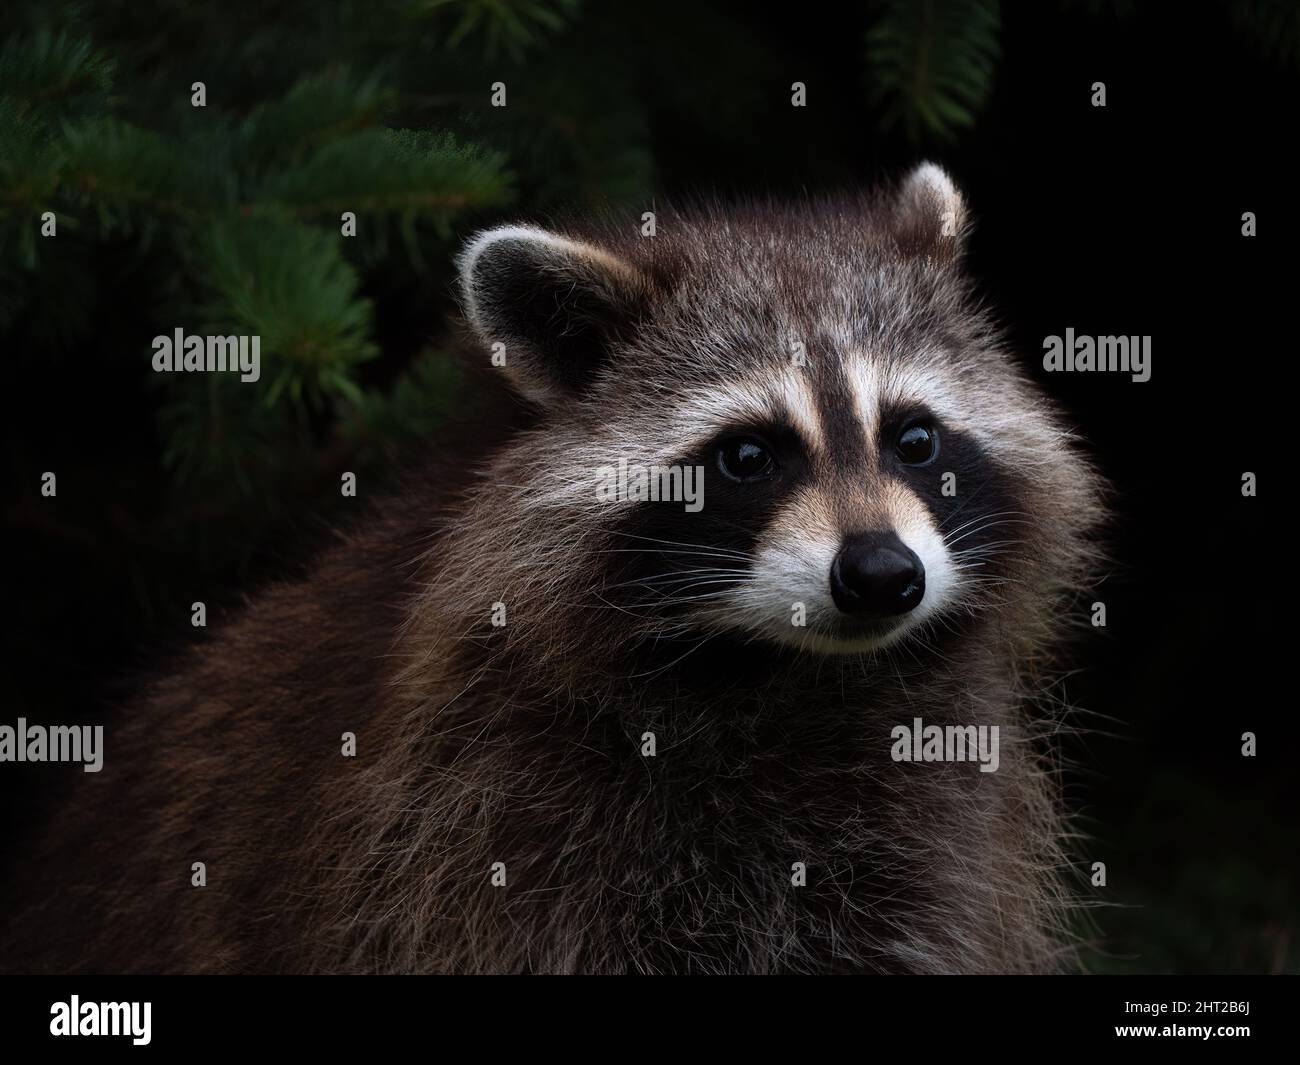 The portrait of a raccoon with a tree in the background Stock Photo